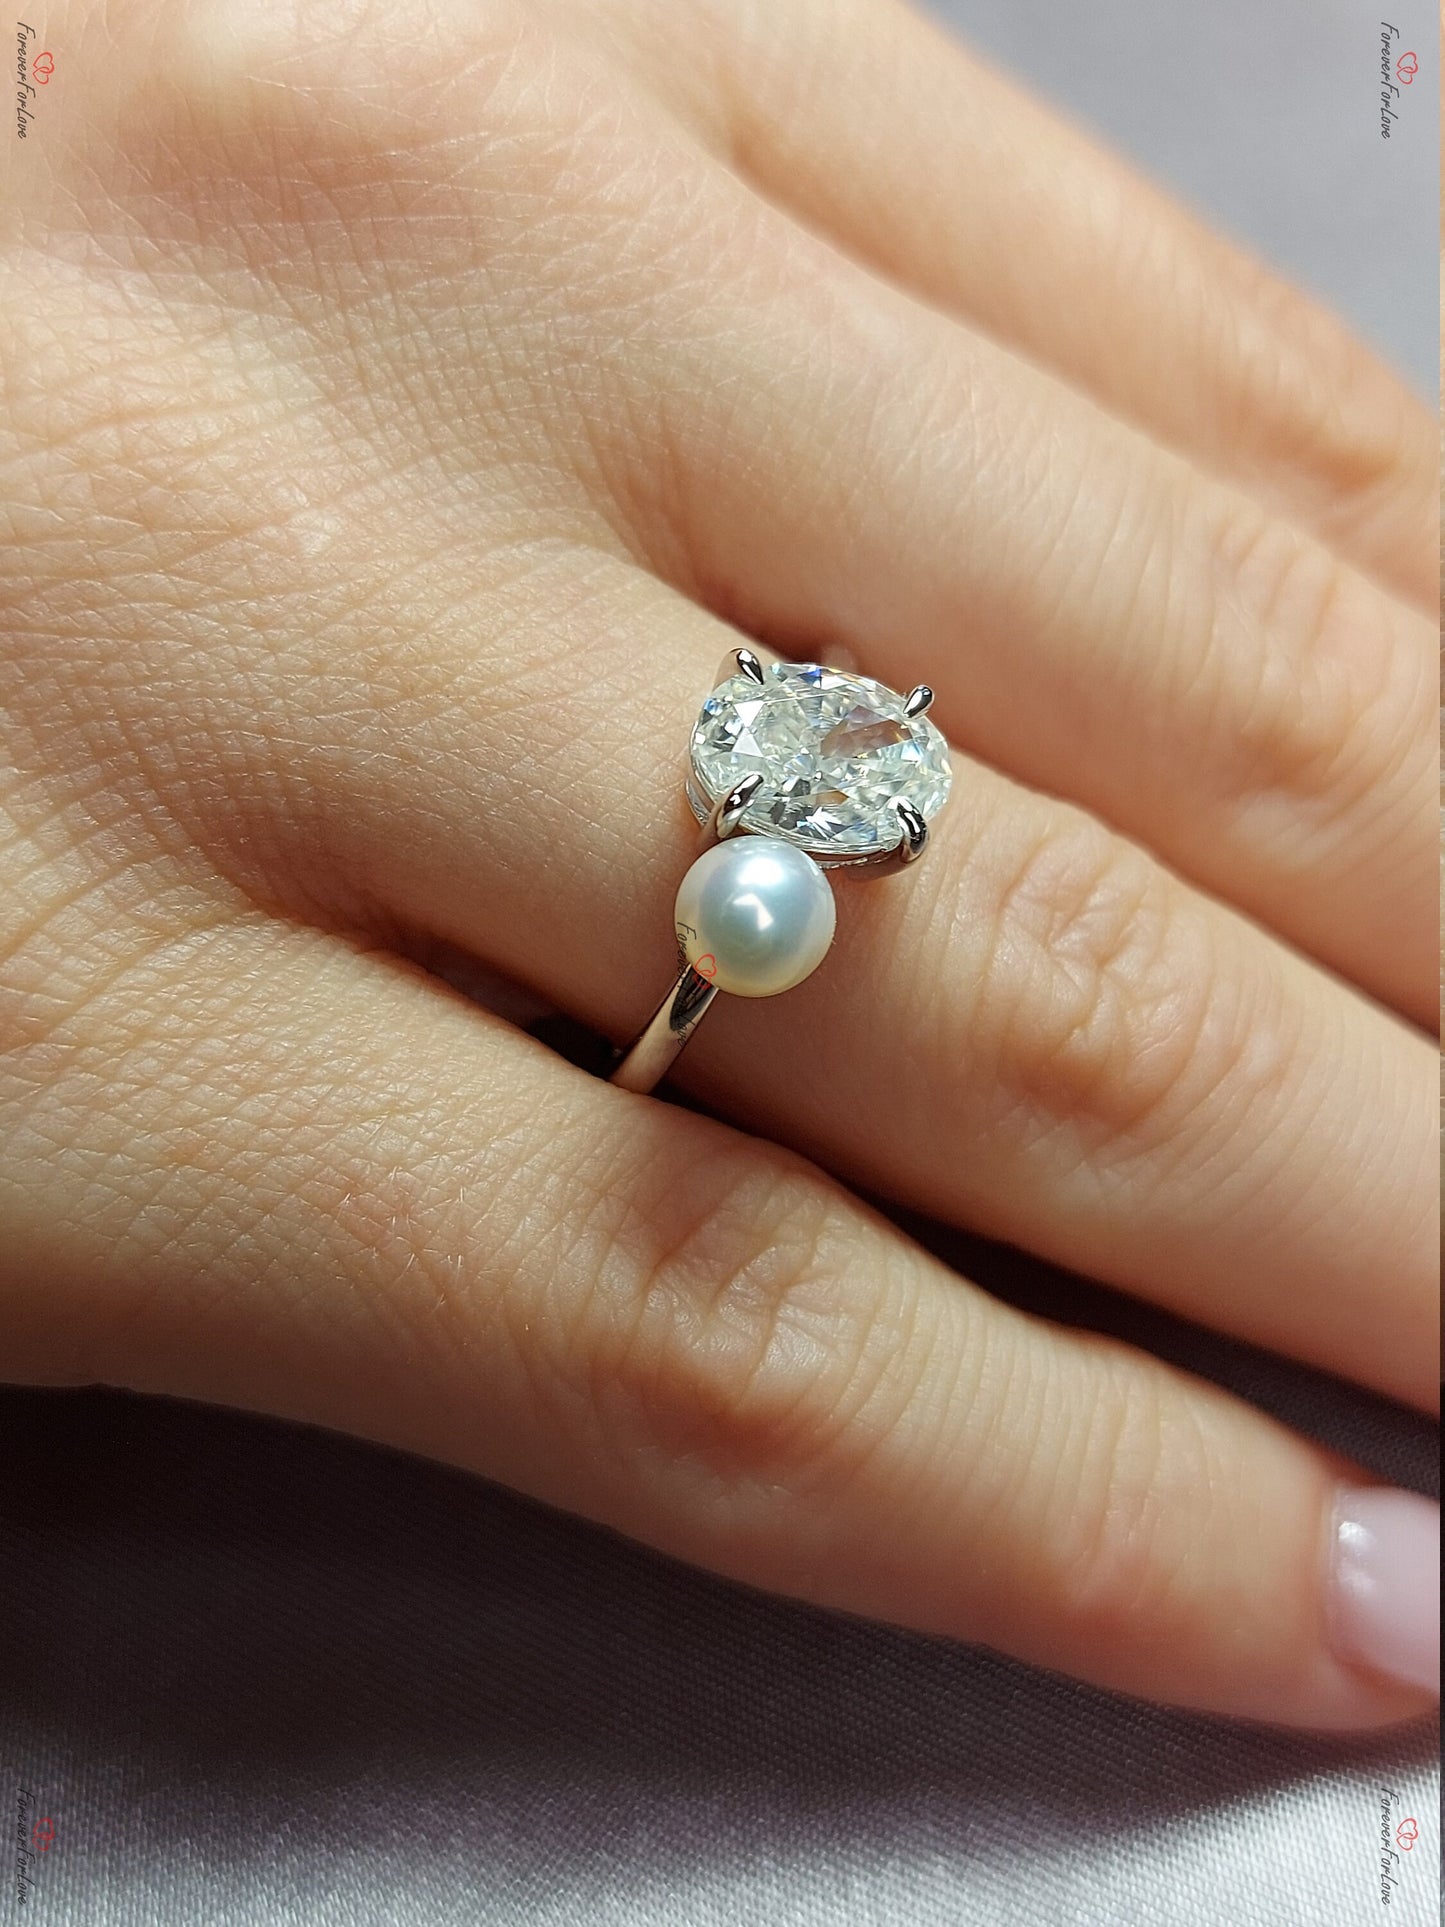 Oval Cut Moissanite Engagement Ring, 2.5Ct Crushed ice Oval 10*7mm engagement ring, Pearl & Diamond ring,  Ariana Grande's Ring.